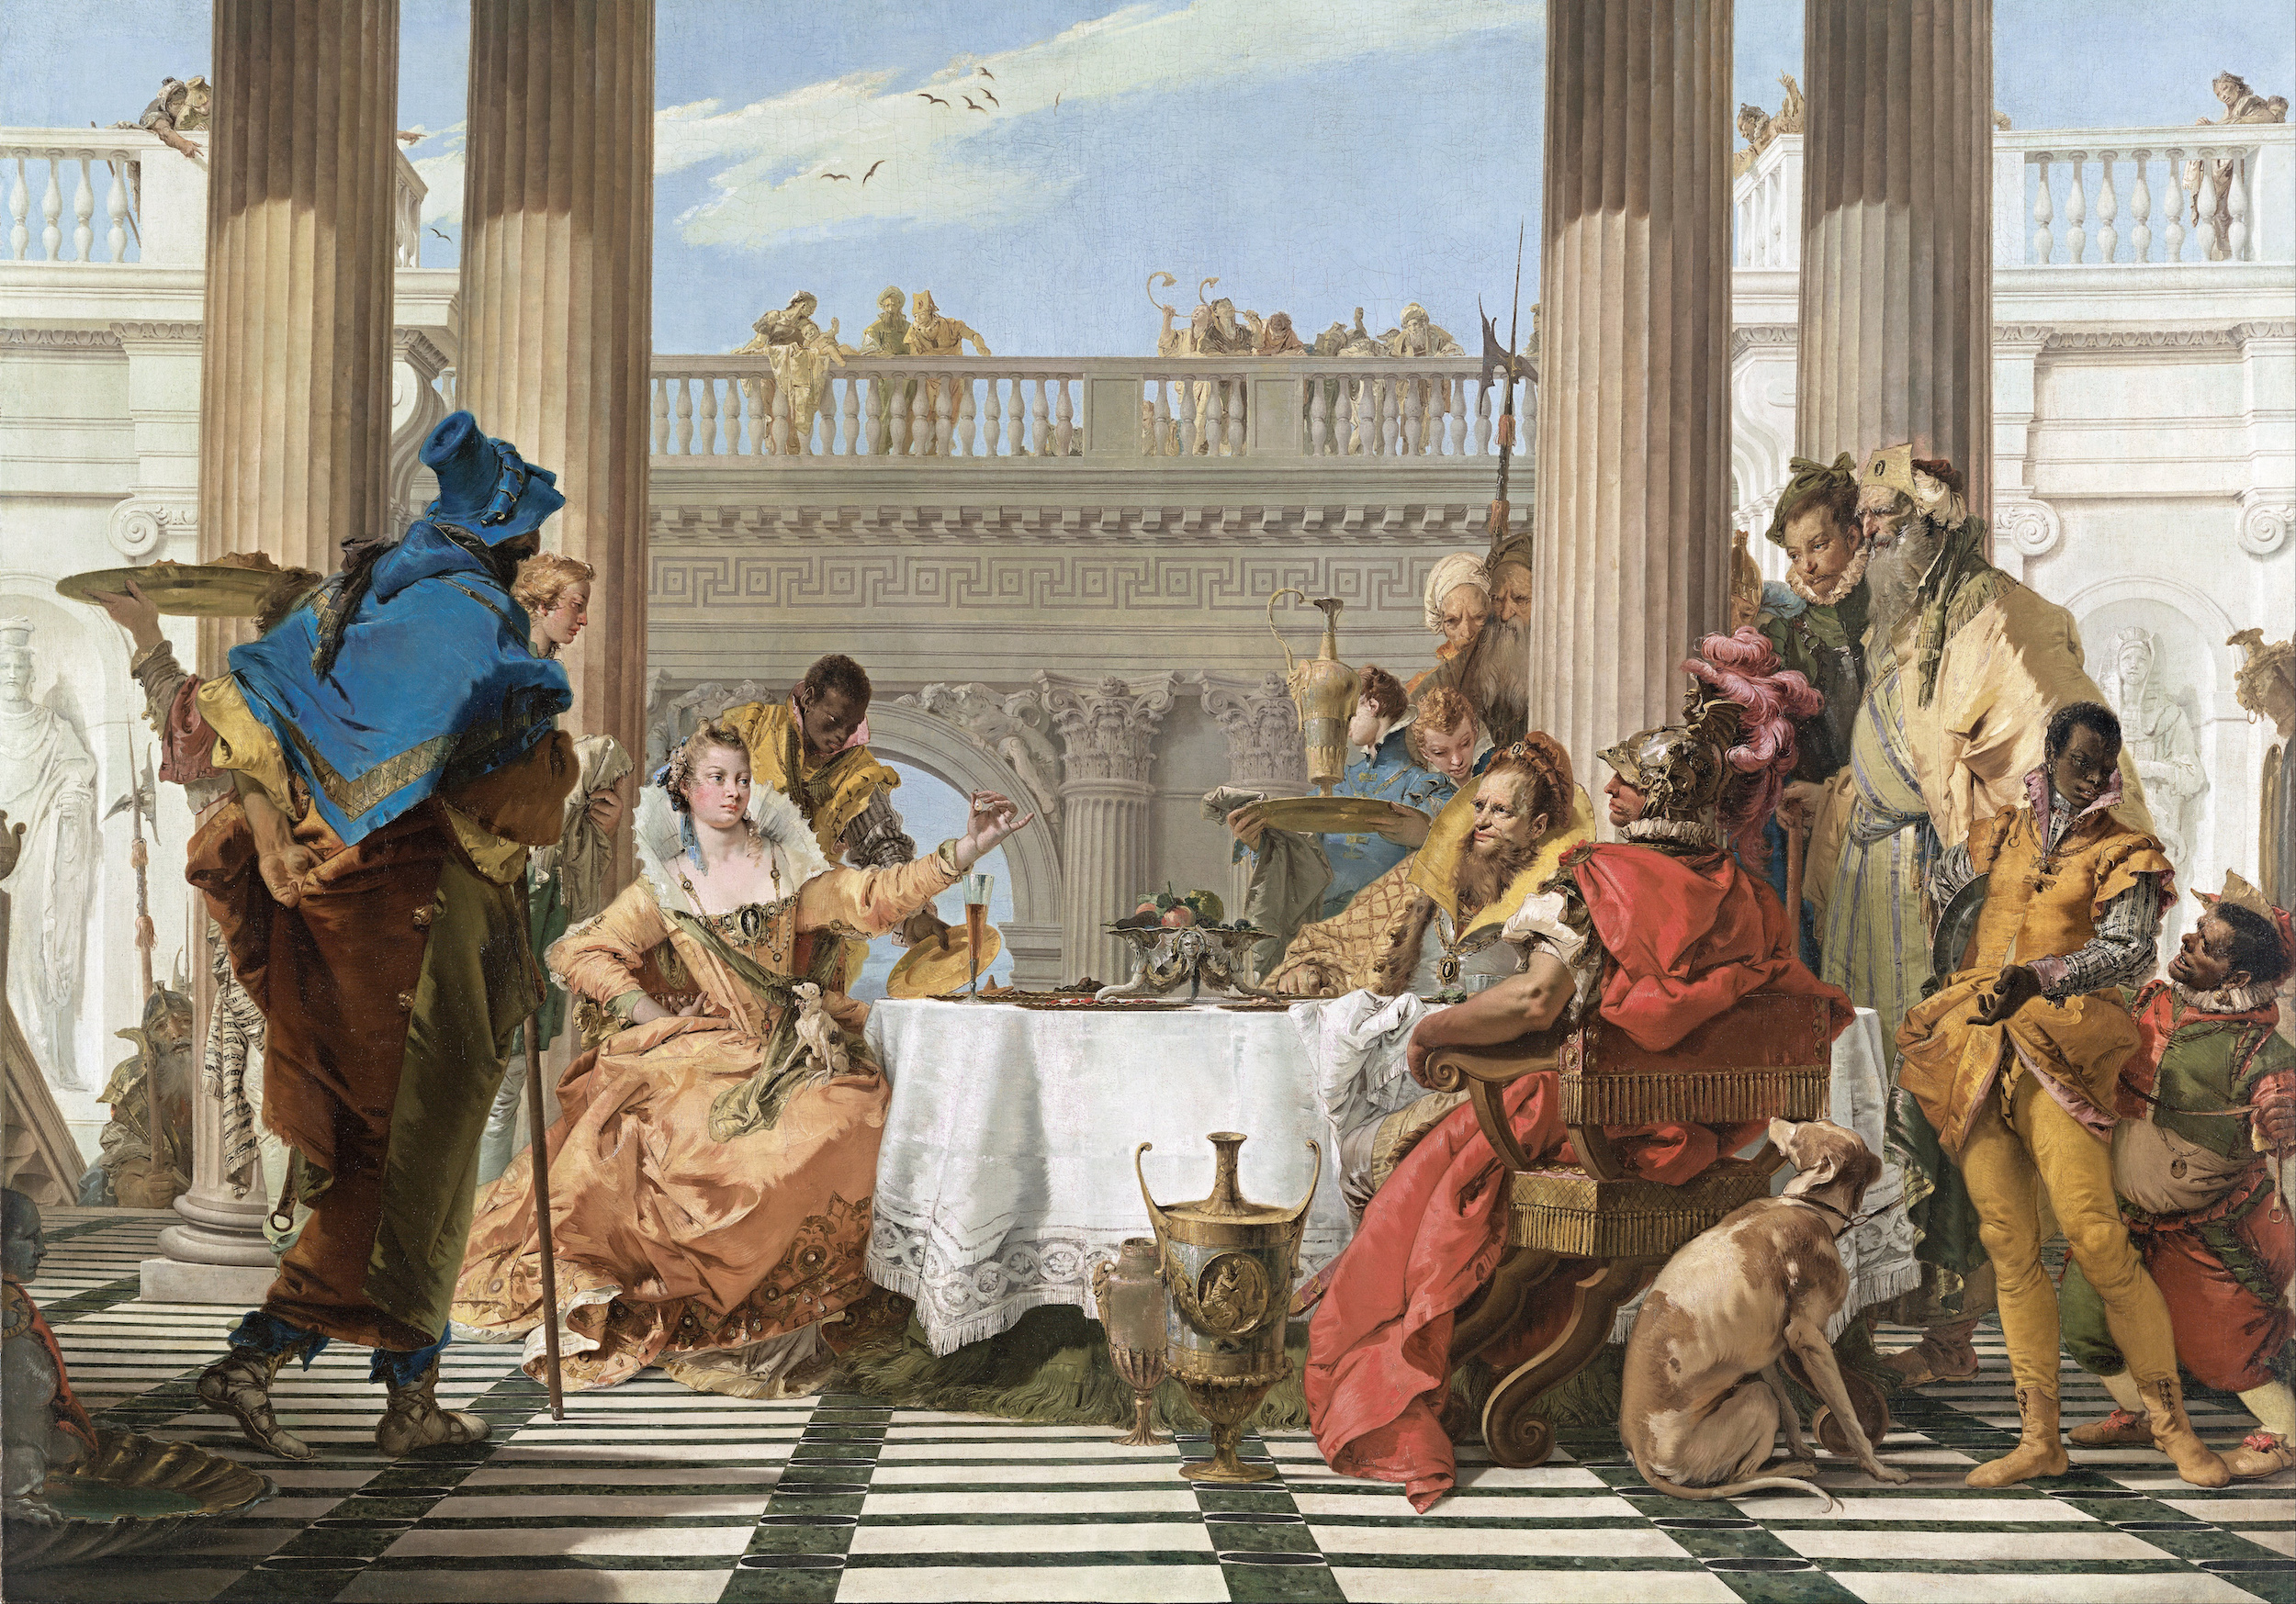 The Banquet of Cleopatra by Giovanni Battista Tiepolo - 1743-44 - 250.3 × 357 cm National Gallery of Victoria